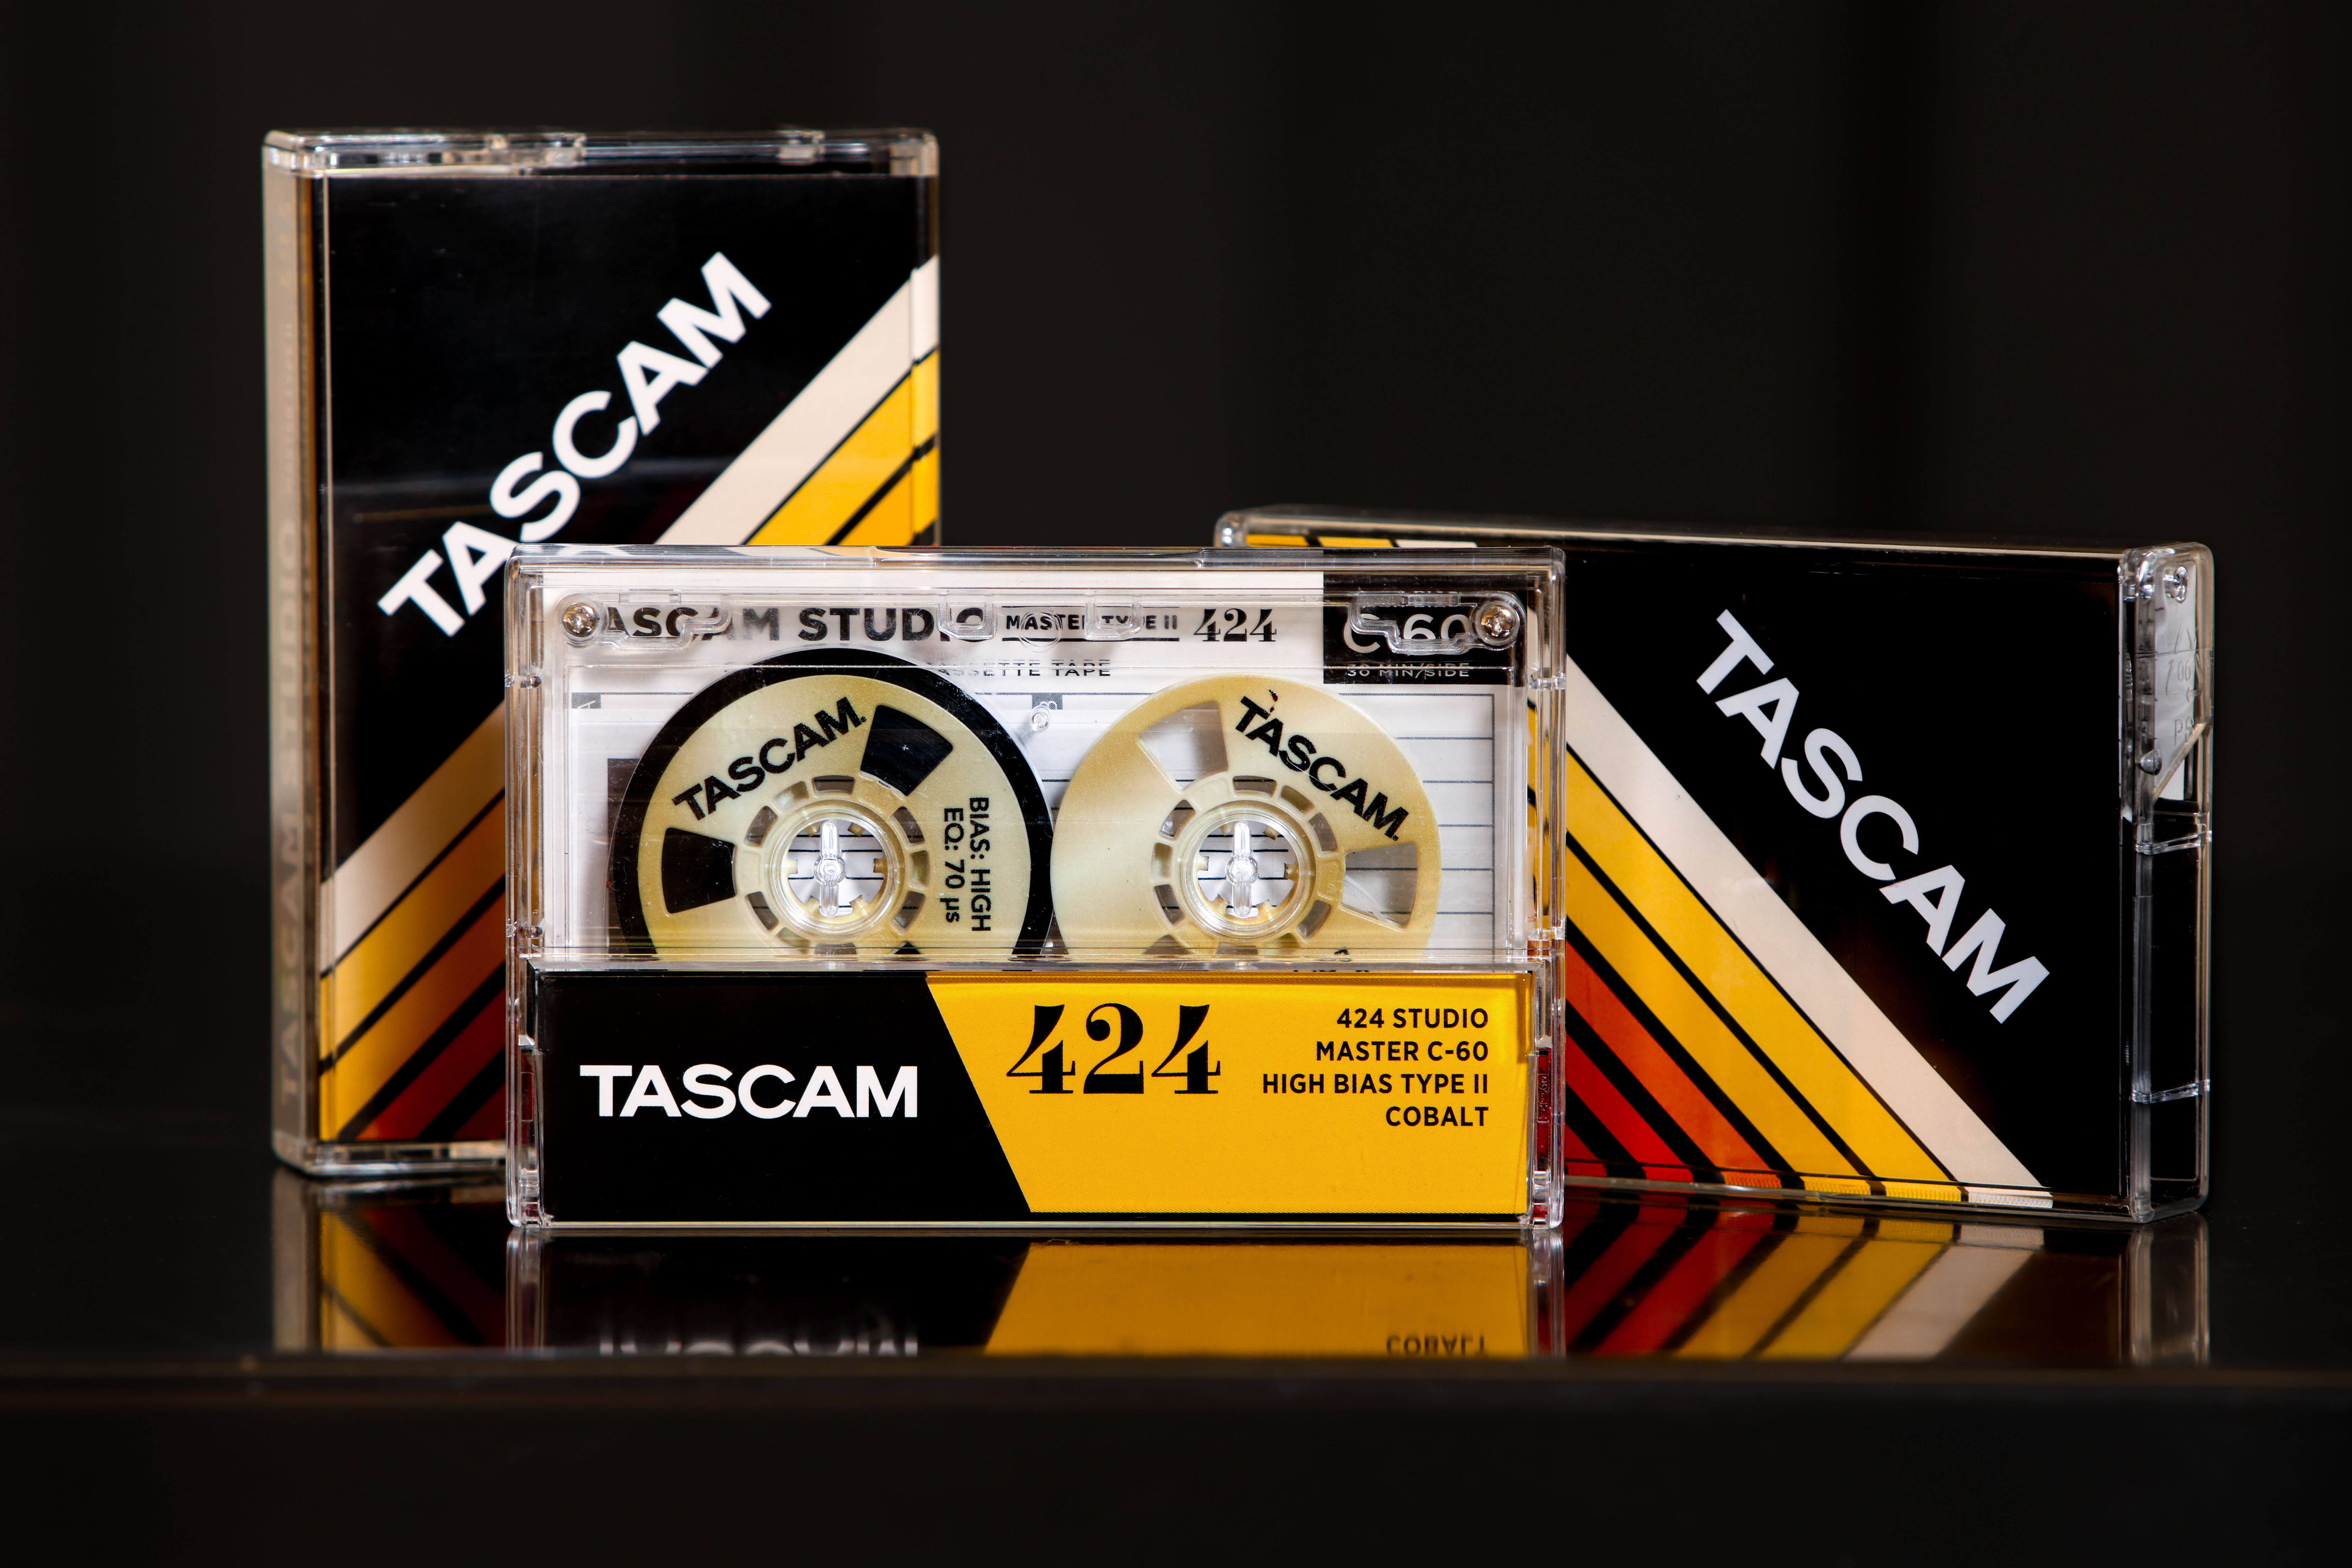 Tascam brings back Retro-Compact Cassette for analog 4 track recorders